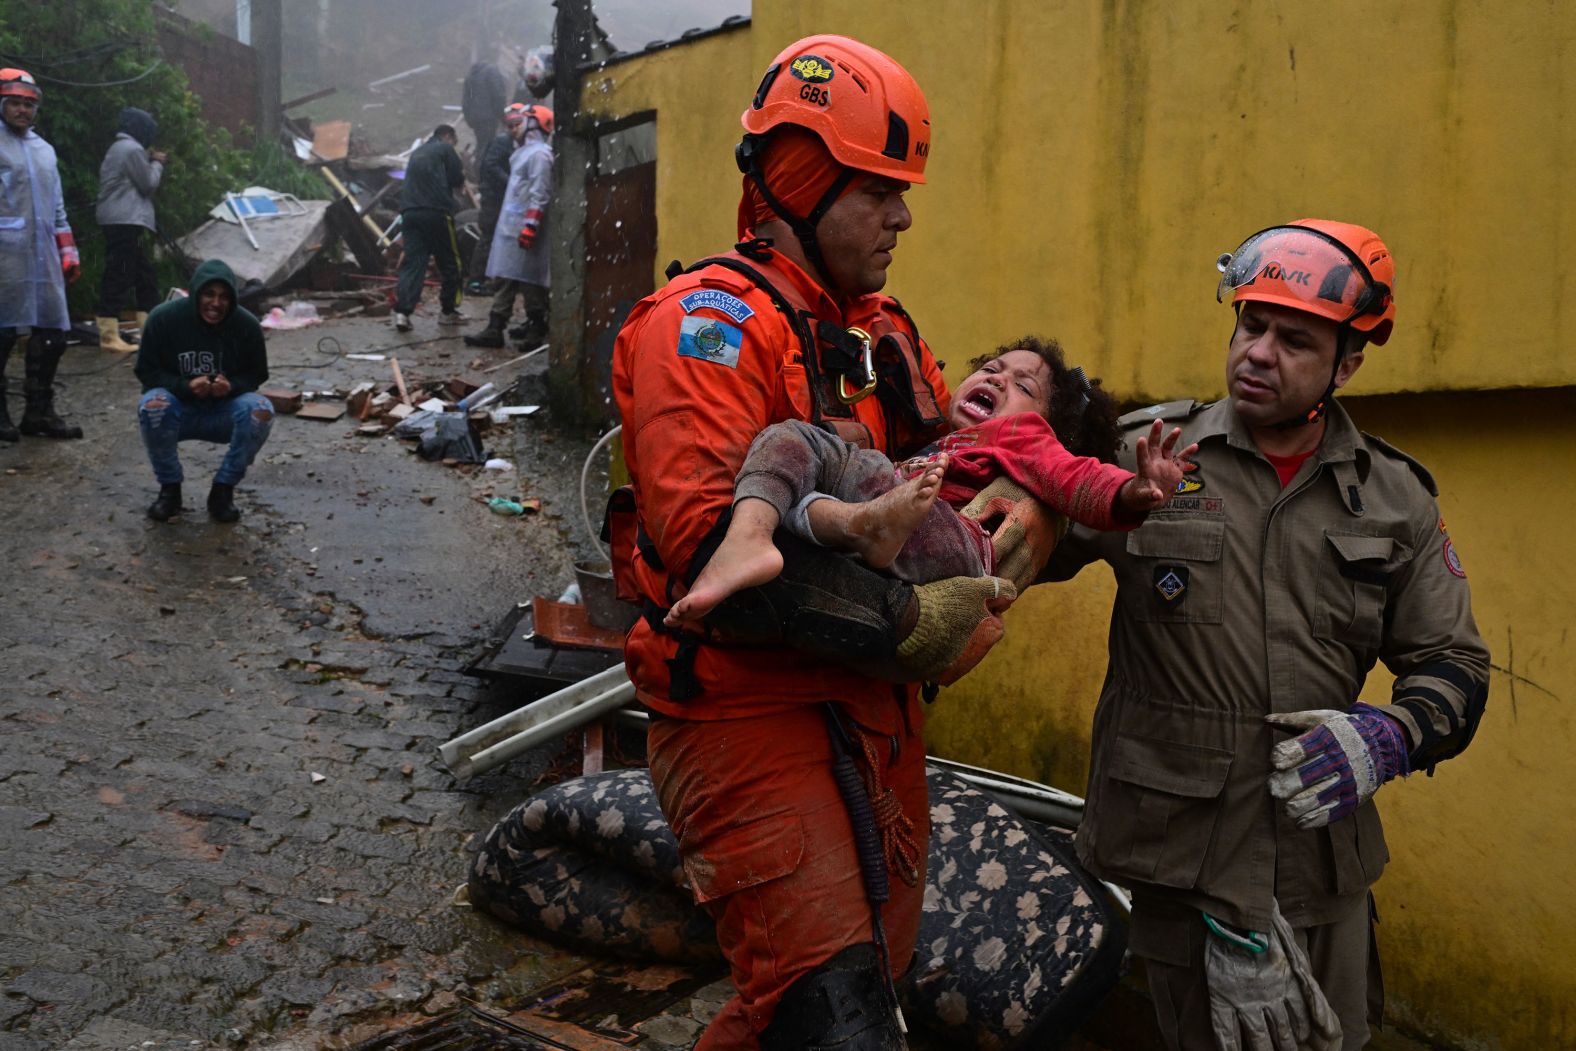 A Civil Defense worker carries a girl who was rescued from the rubble of her house, which was destroyed by <a href="index.php?page=&url=https%3A%2F%2Fwww.cnn.com%2F2024%2F03%2F25%2Fclimate%2Fbrazil-flooding-landslide-climate-intl%2Findex.html" target="_blank">heavy rains</a> in Petrópolis, Brazil, on Saturday, March 23.